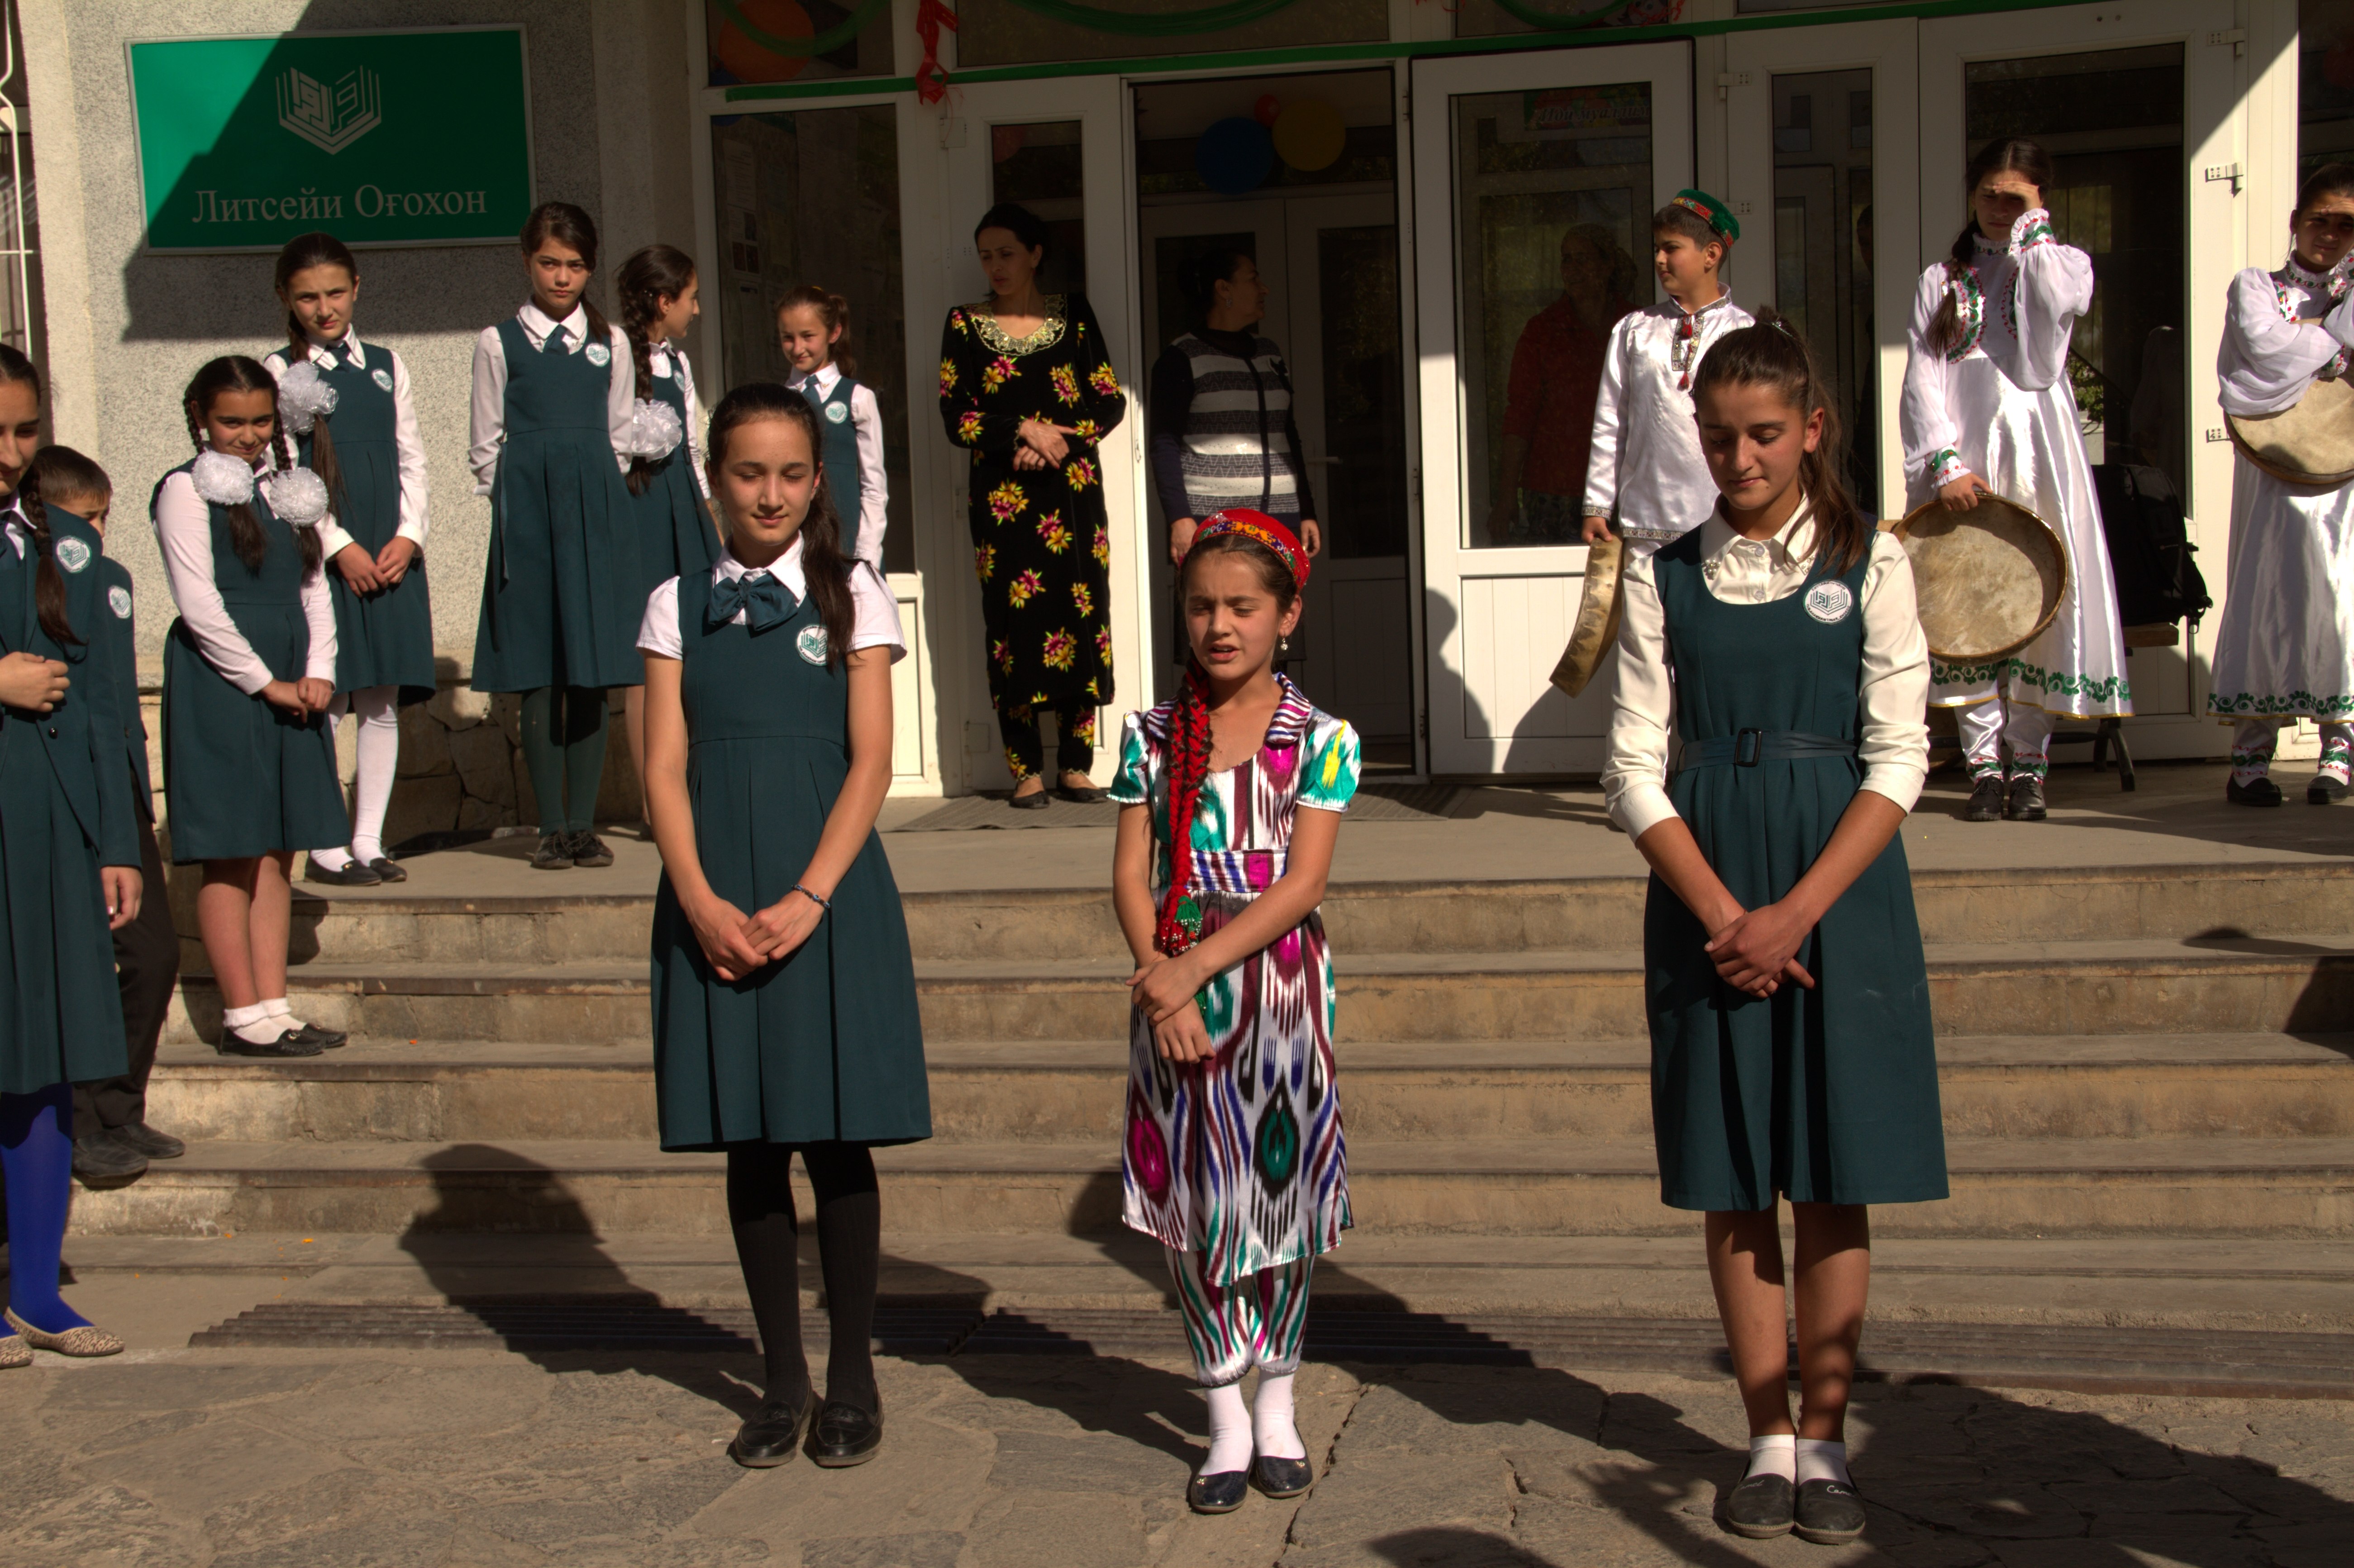 School children greet guests at the Aga Khan Lycee in Khorog, Tajikistan, with traditional Pamiri dance and song, as well as a poetry recitation in Tajiki/Farsi and English. The Lycee provides the best quality education to this isolated part of the world. Though the Lycee charges fees, many students who can prove need are subsidized. (Photo: Dilafruz Khonikboyeva/AKDN)